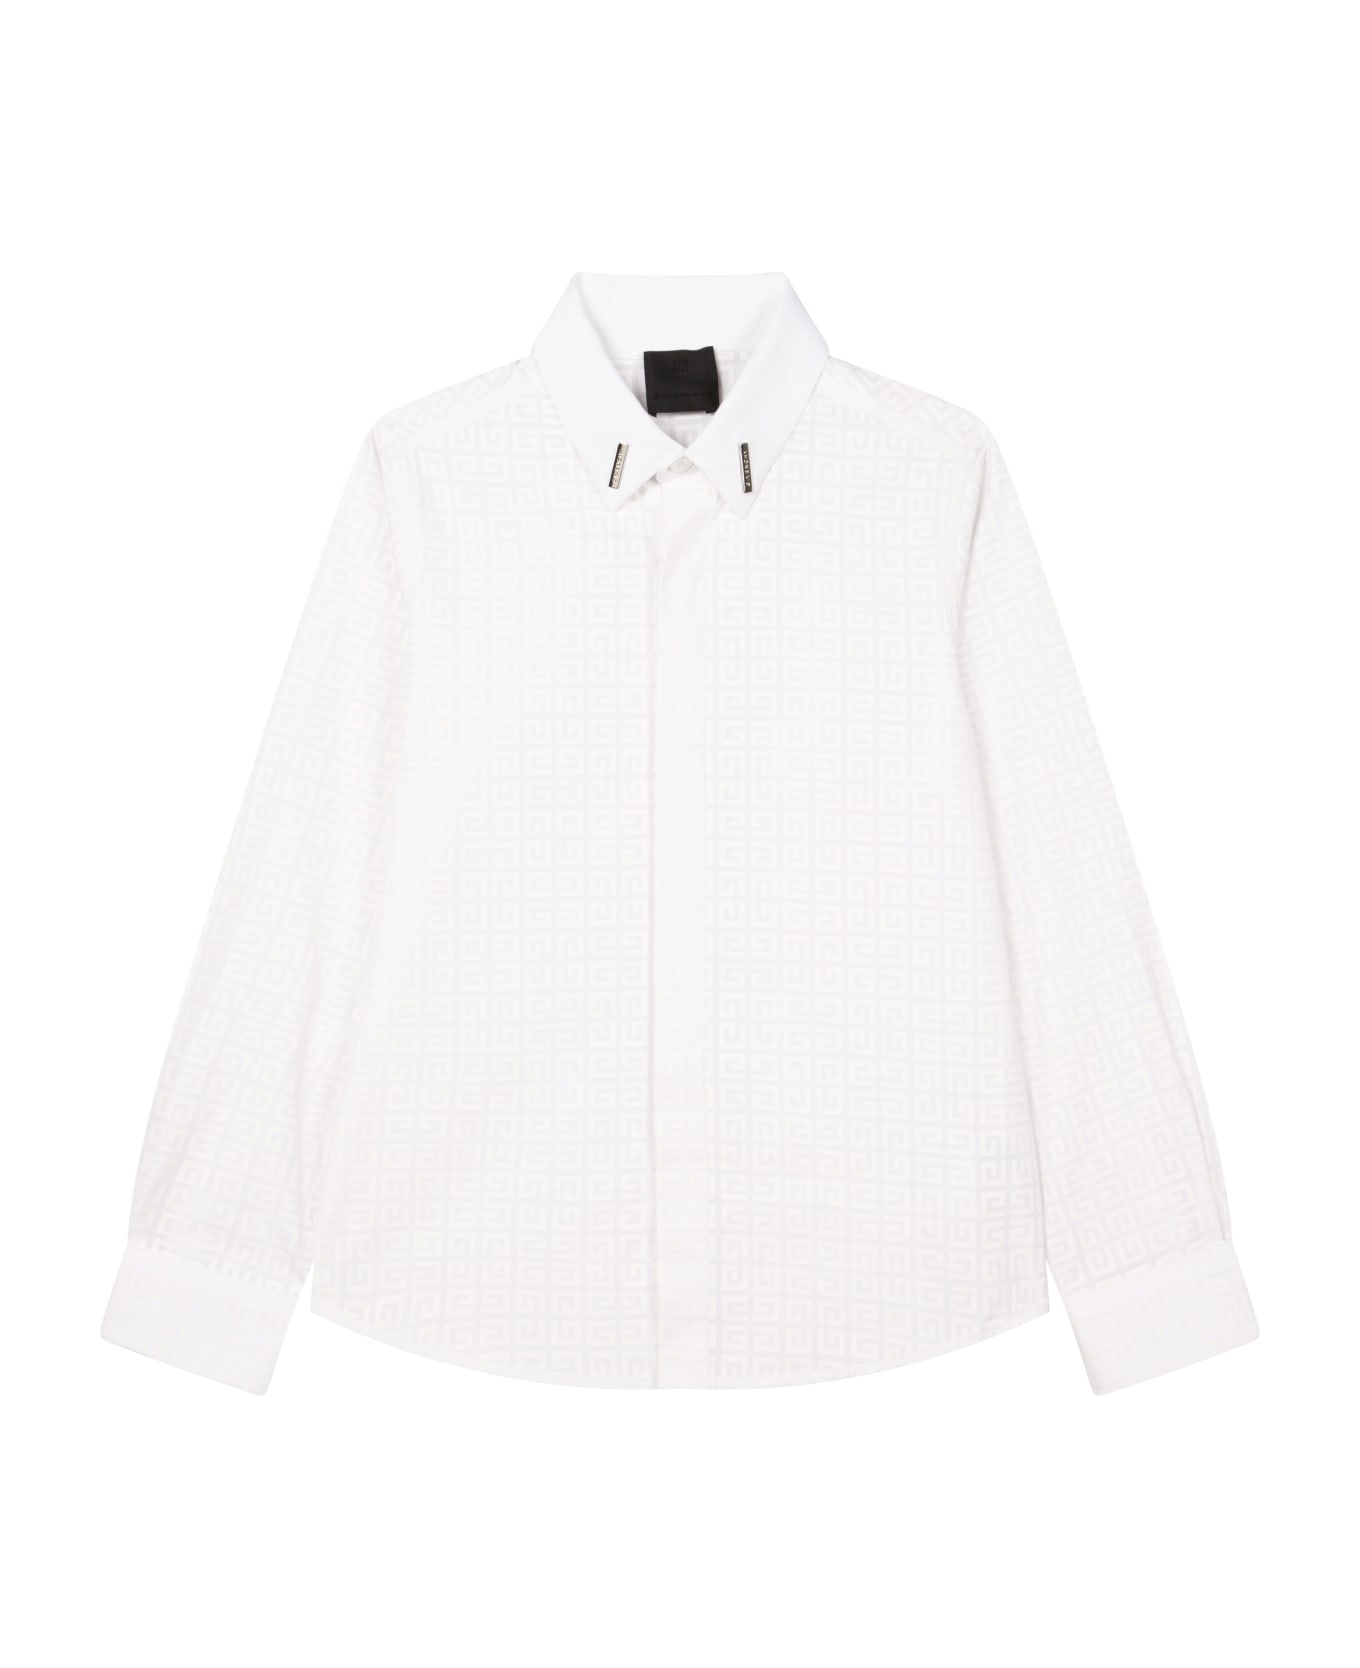 Givenchy Shirt With Application - White